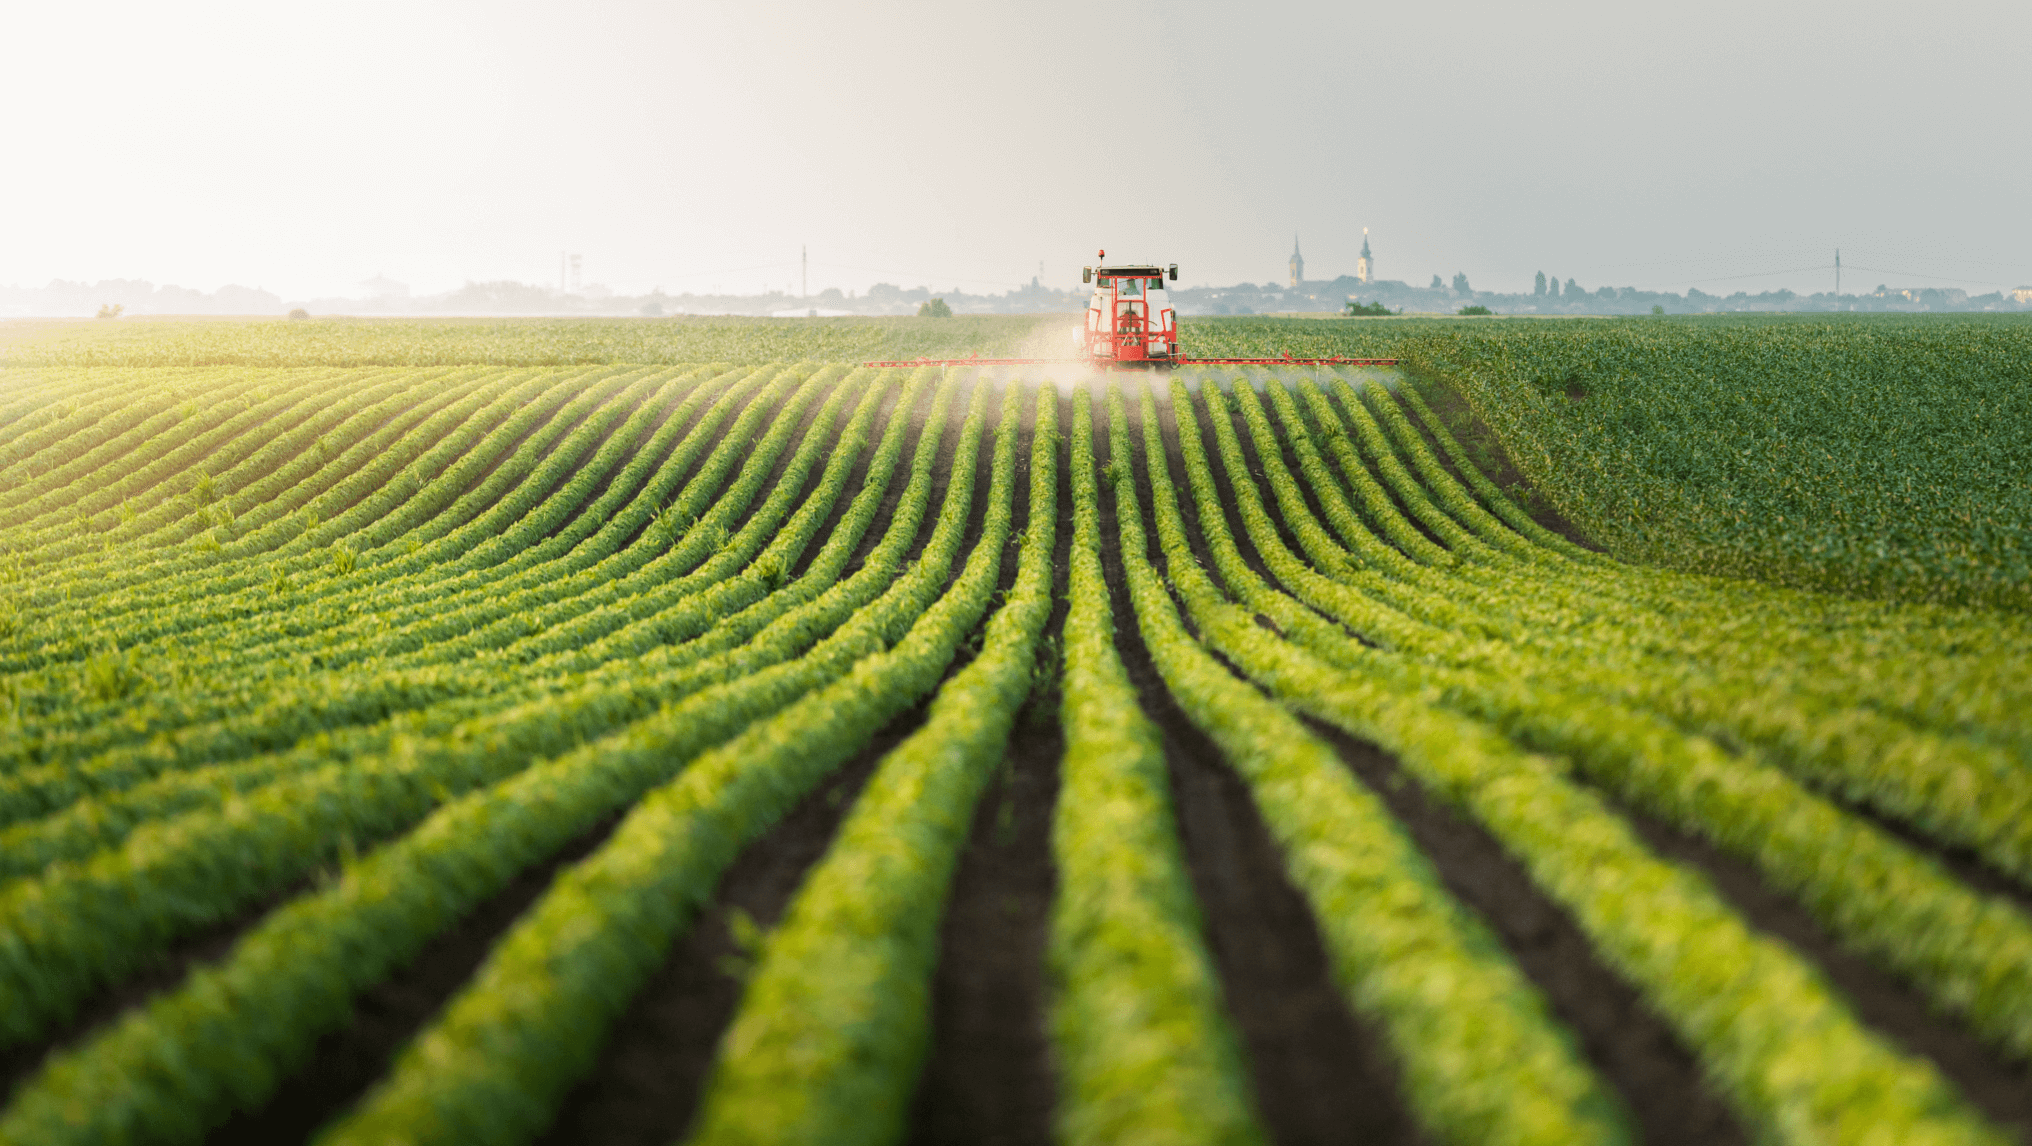 A red tractor sprays crops in a large, green, orderly field with a clear sky in the background, exemplifying the precision of industrial agriculture.